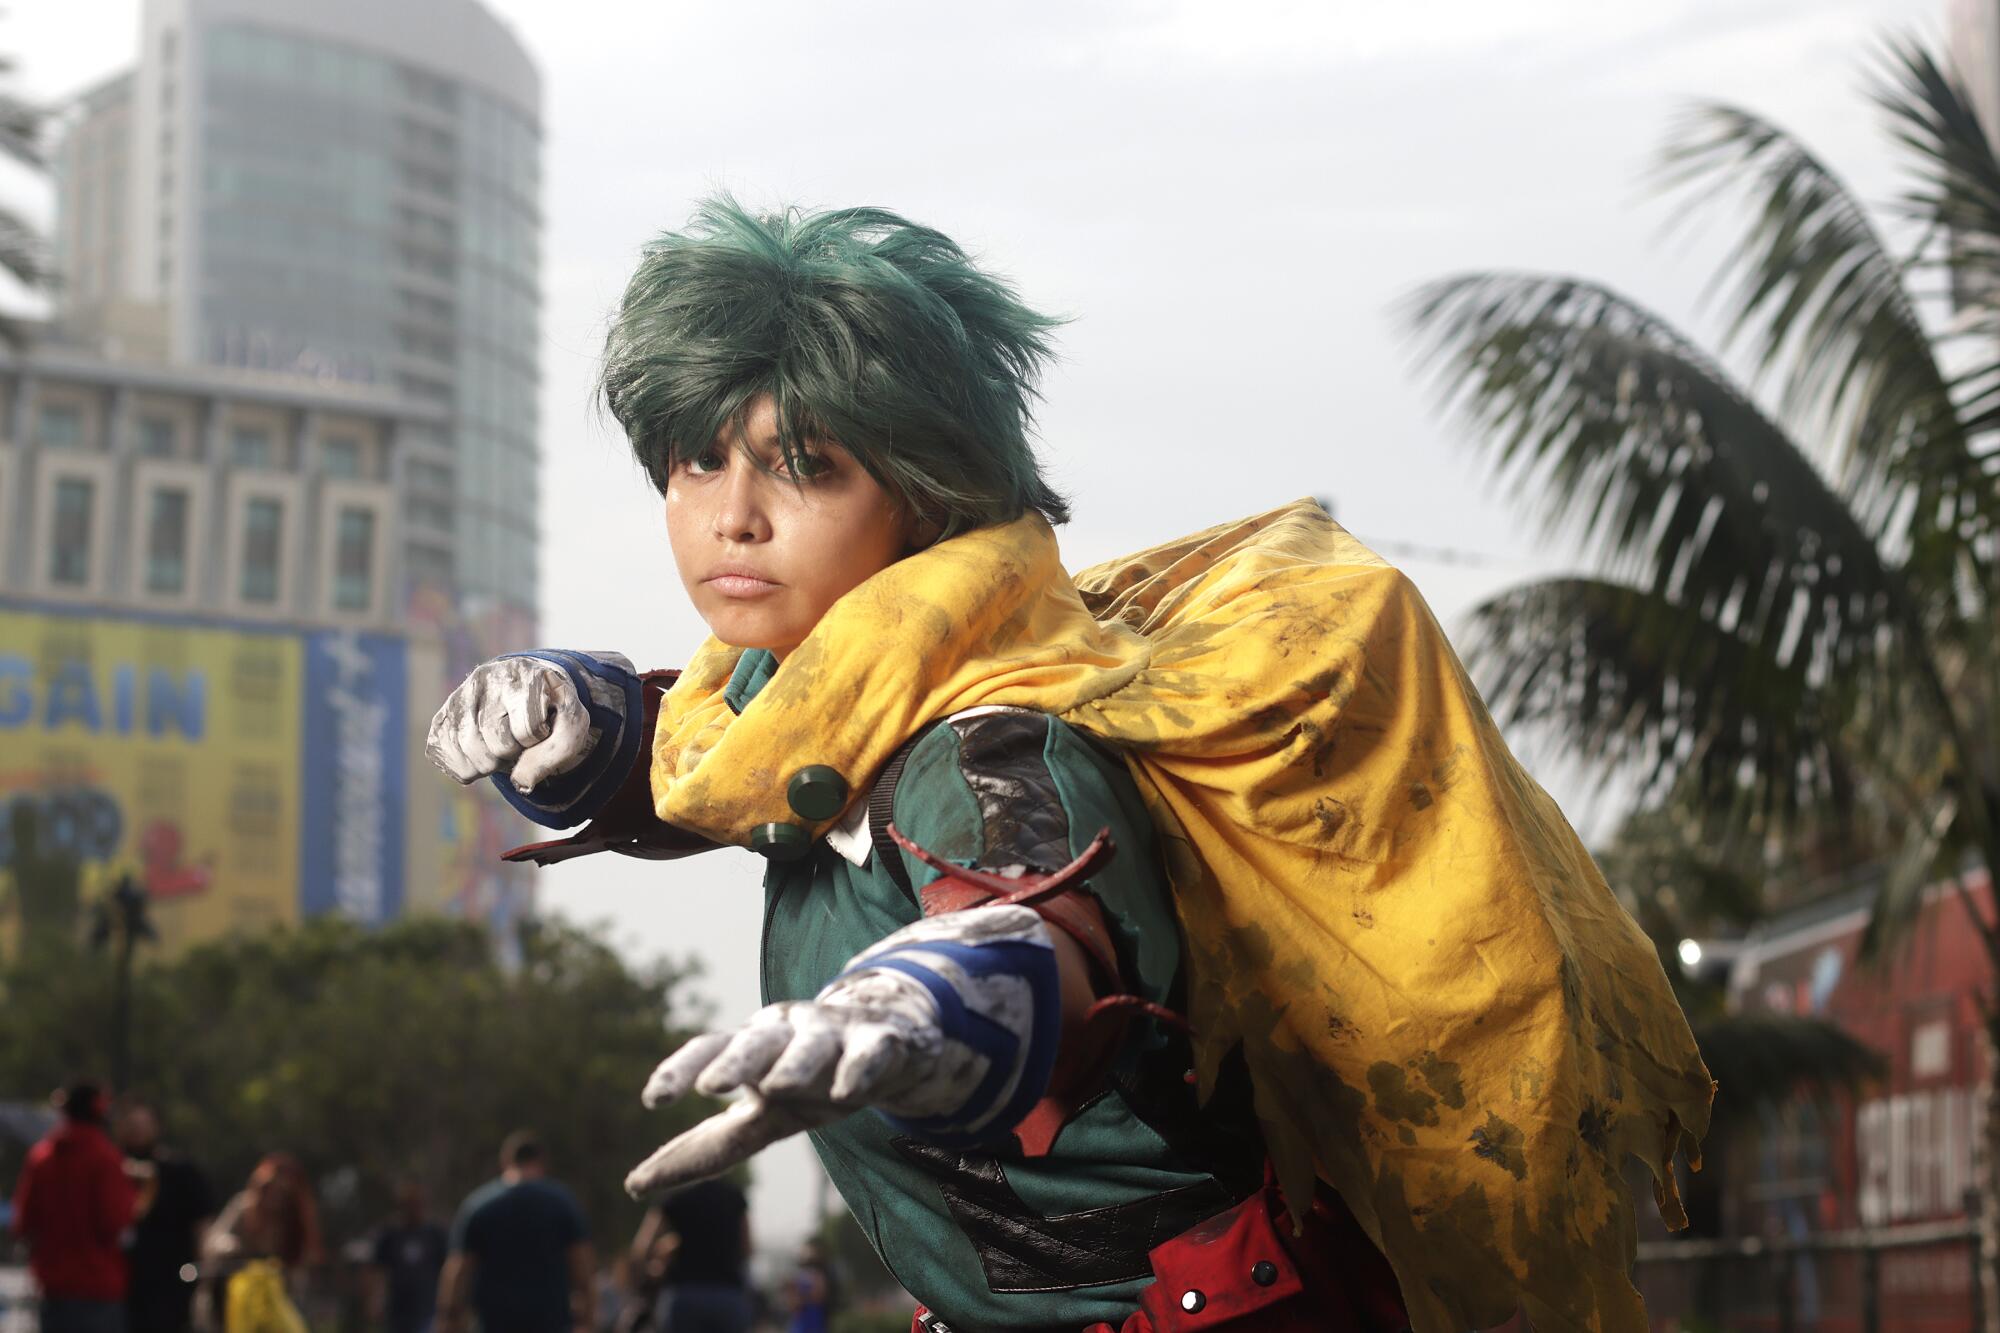 Pepi Meneses from Santiago, Chile drove from Orlando to San Diego to attend Comic-Con cosplay dressed as Deku